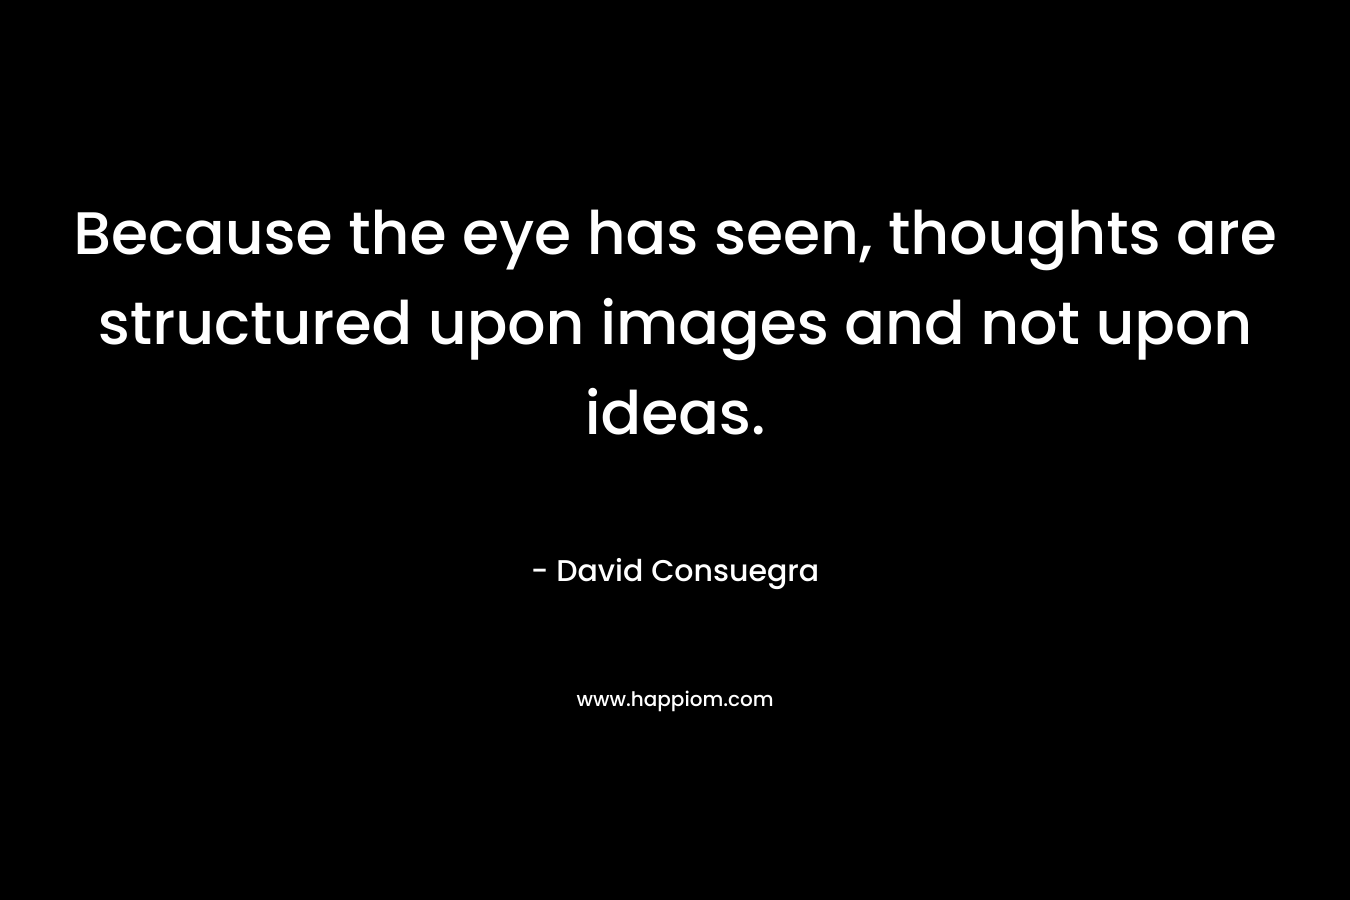 Because the eye has seen, thoughts are structured upon images and not upon ideas. – David Consuegra